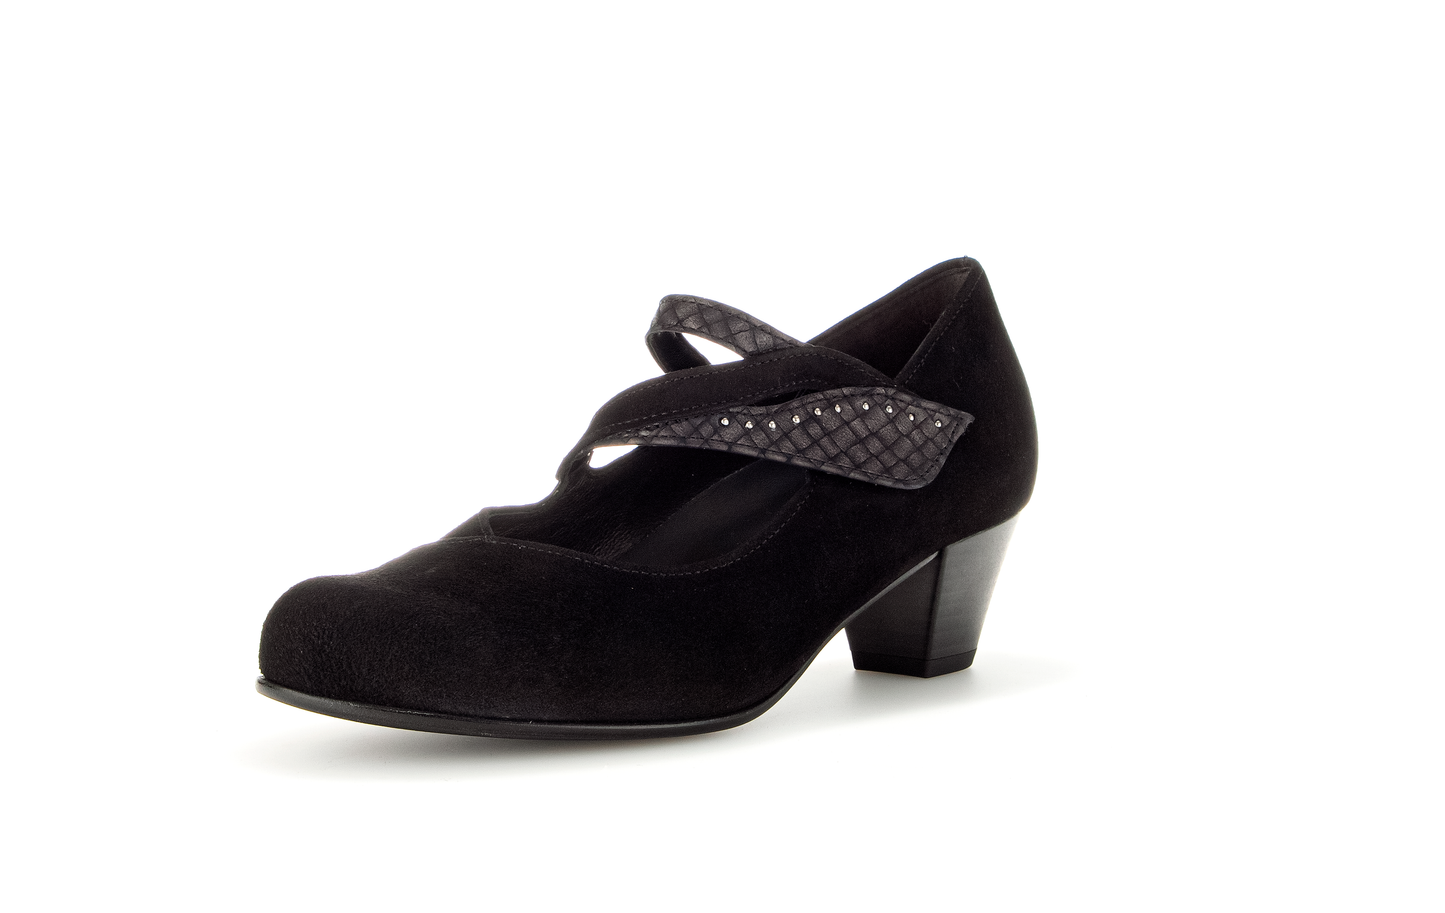 Gabor 96.146.47 Comfort Black H Fit Low Heels with Straps & Studs